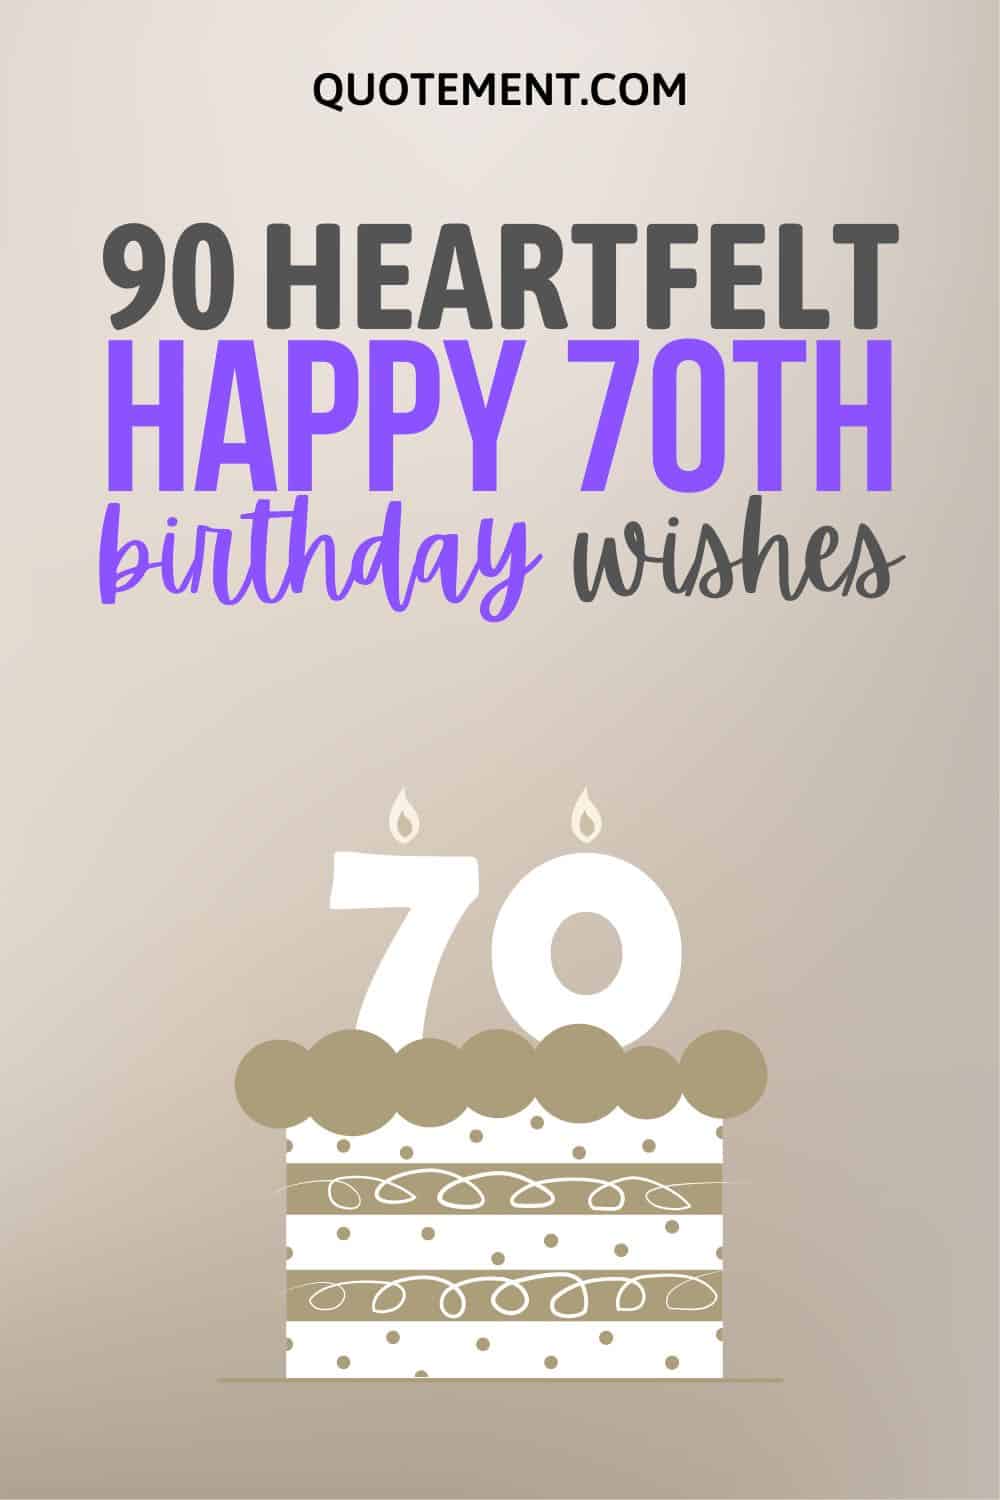 90 Happy 70th Birthday Wishes For Your Dear 70-Year-Old
